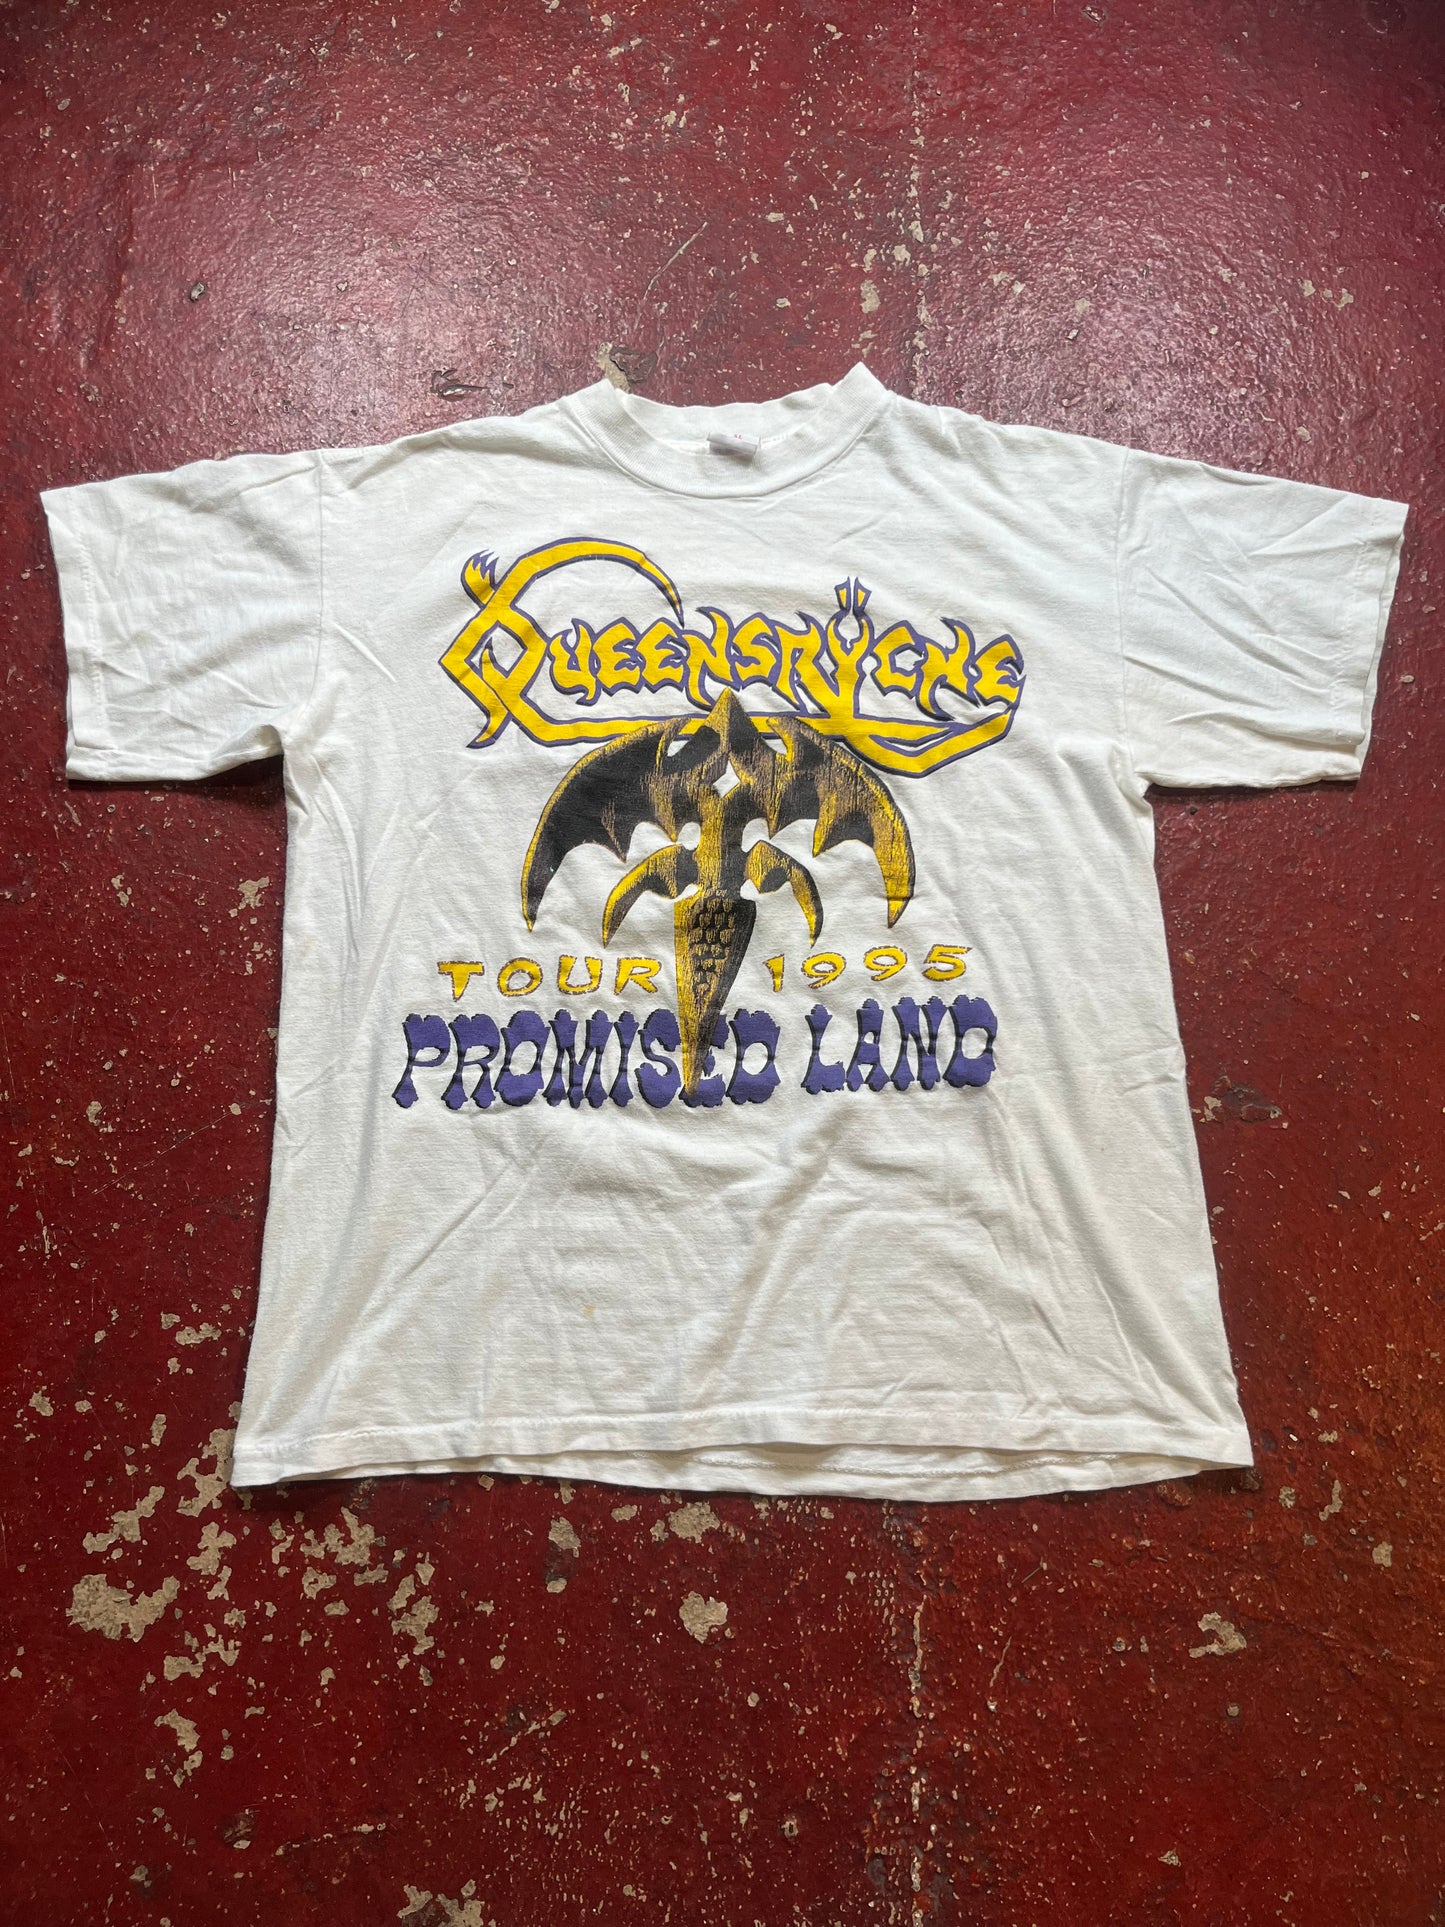 1995 Queensryche “Promised Land” Tee